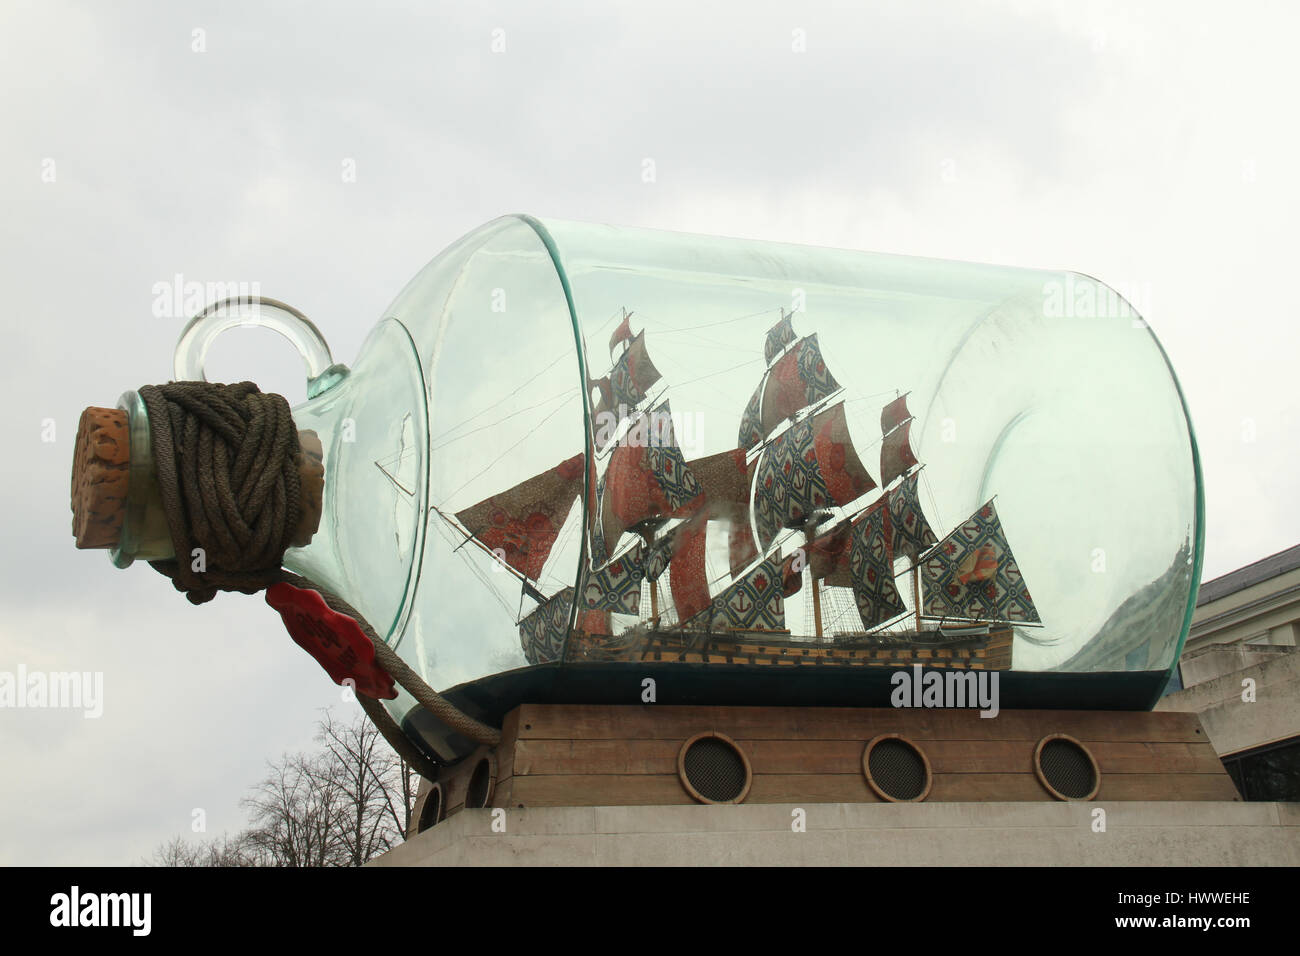 London, UK. 23rd Mar, 2017. Yinka Shonibare's replica of Nelson's HMS Victory in a bottle mounted on a plinth by the Royal Greenwich Park. Greenwich Park hosts the Prime Meridian Line and Royal Observatory as well as being part of the Greenwich Maritime World Heritage Site which is home to The National Maritime Museum and Old Royal Naval College. Credit: David Mbiyu/Alamy Live News Stock Photo